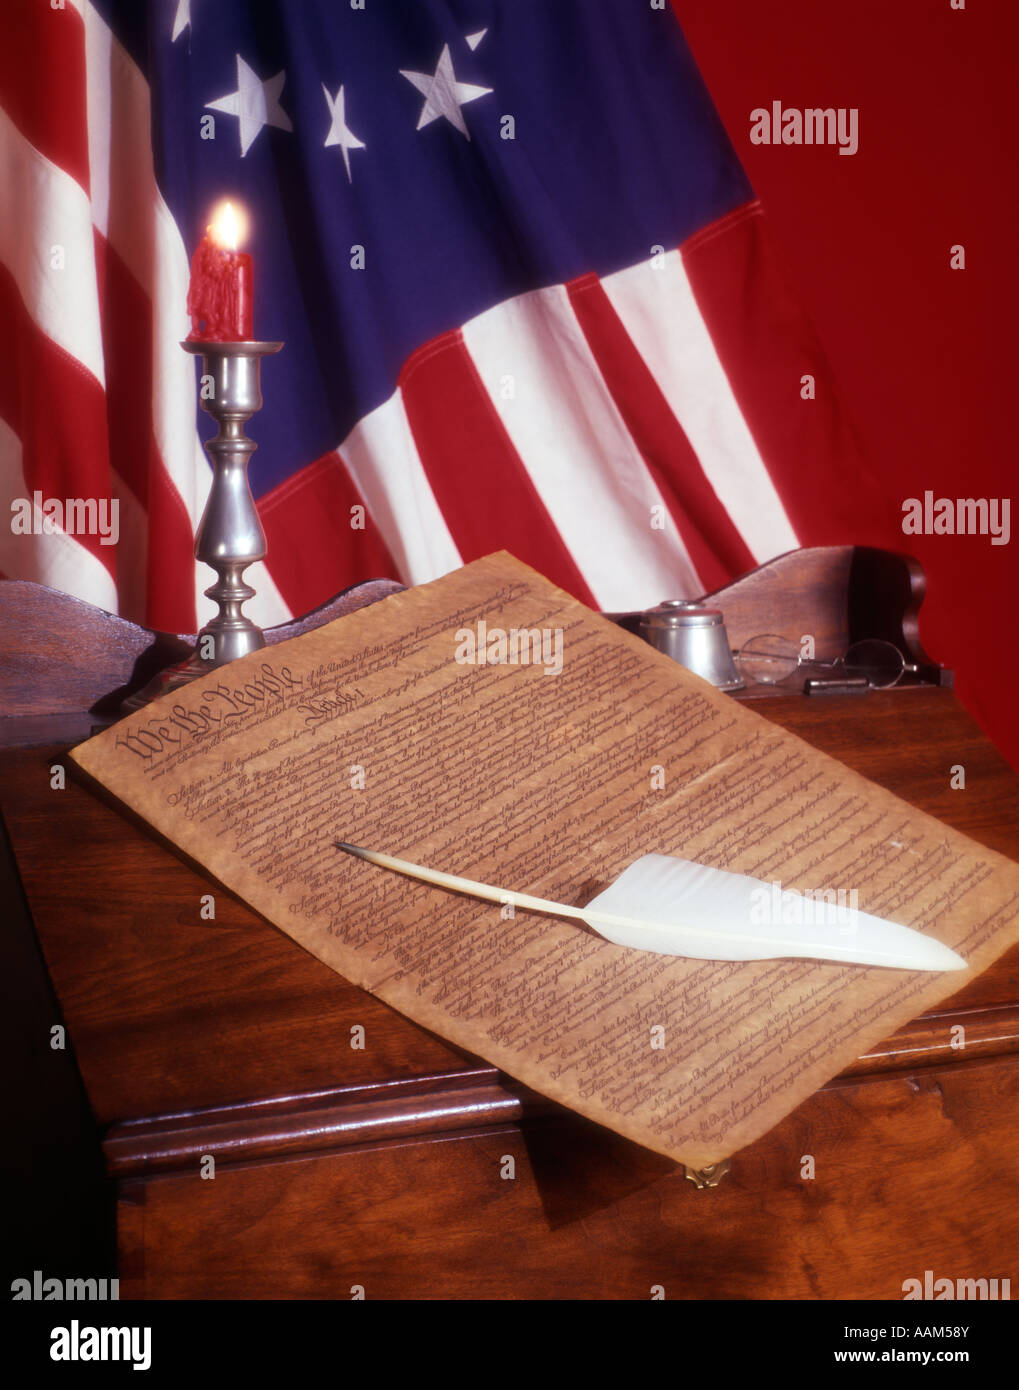 1776 COLONIAL AMERICA FLAG PARCHMENT OF UNITED STATES CONSTITUTION ON DESK QUILL CANDLE PATRIOTIC GOVERNMENT FREEDOM Stock Photo